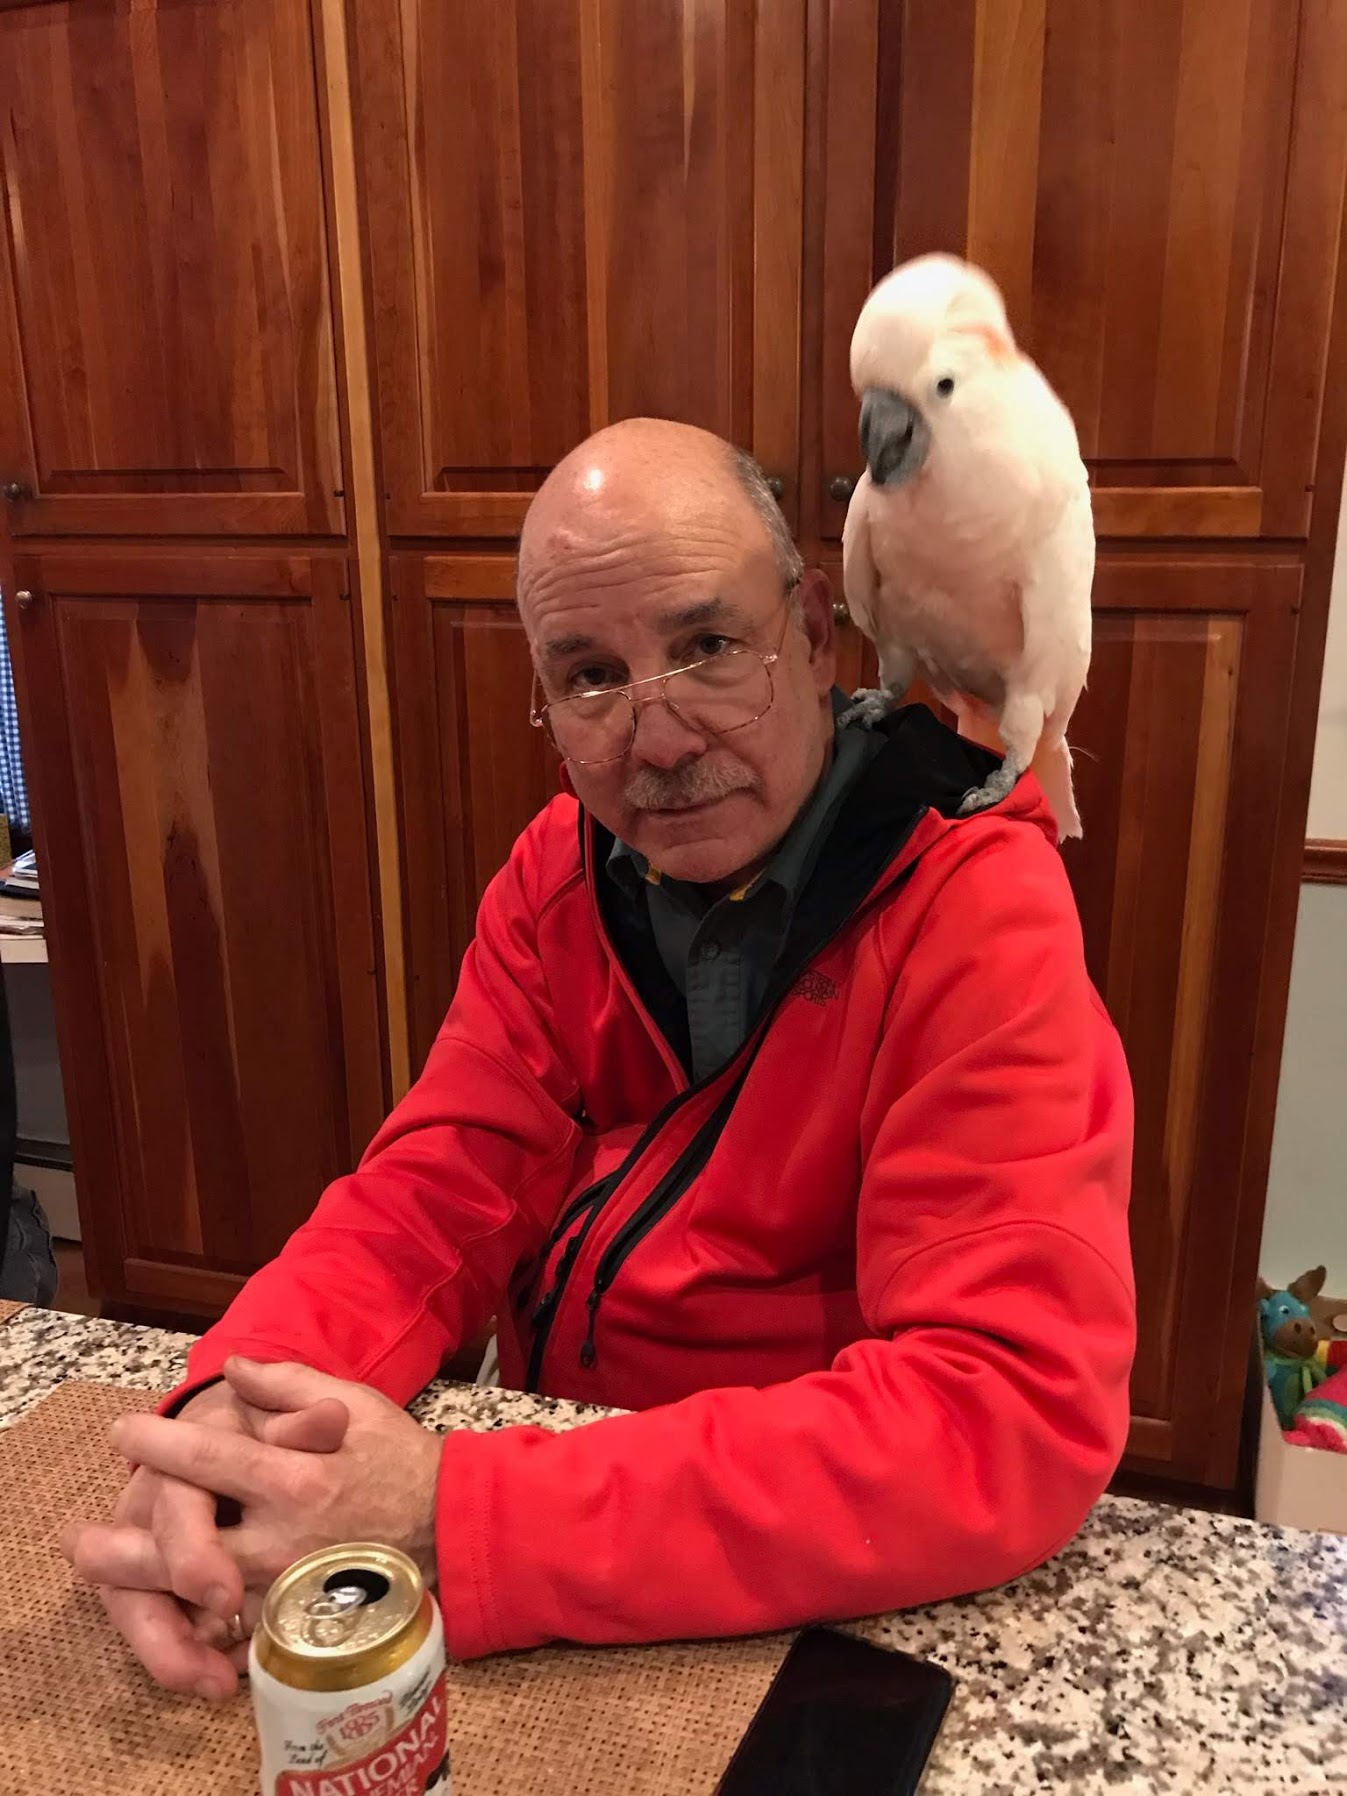 My Dad and a bird